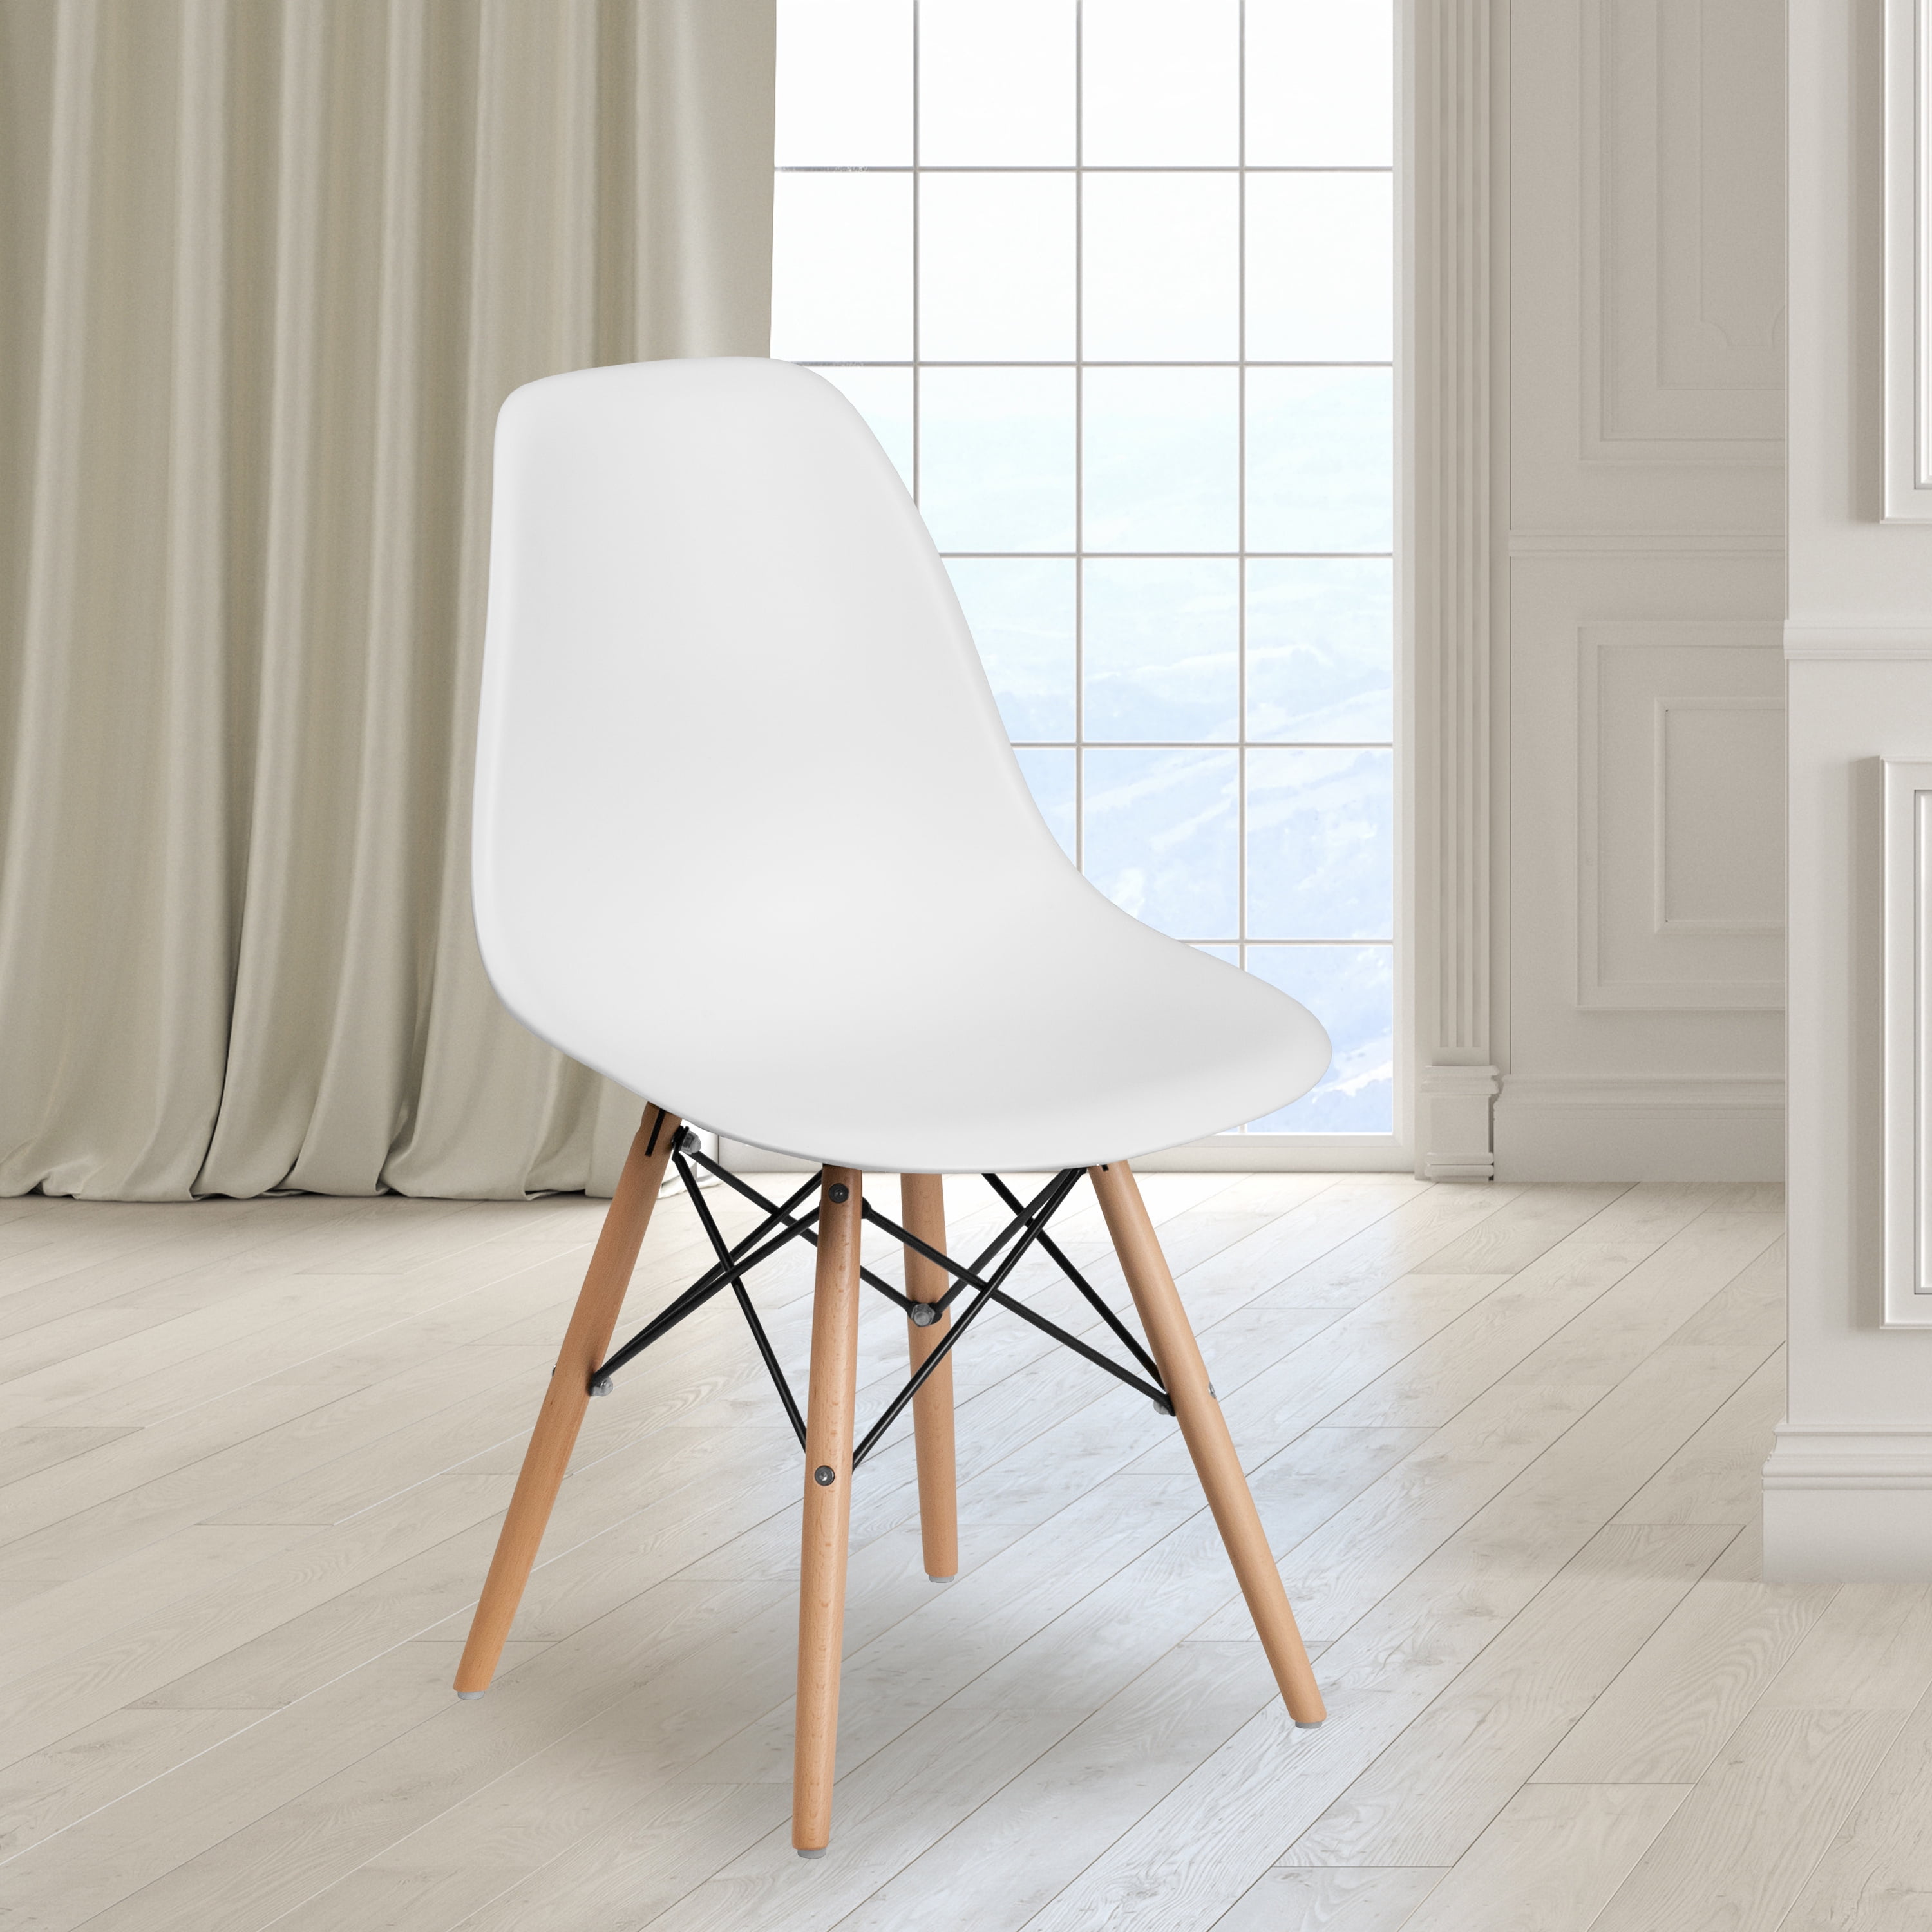 Flash Furniture White Plastic Chair, Black Plastic Chair With Wood Legs